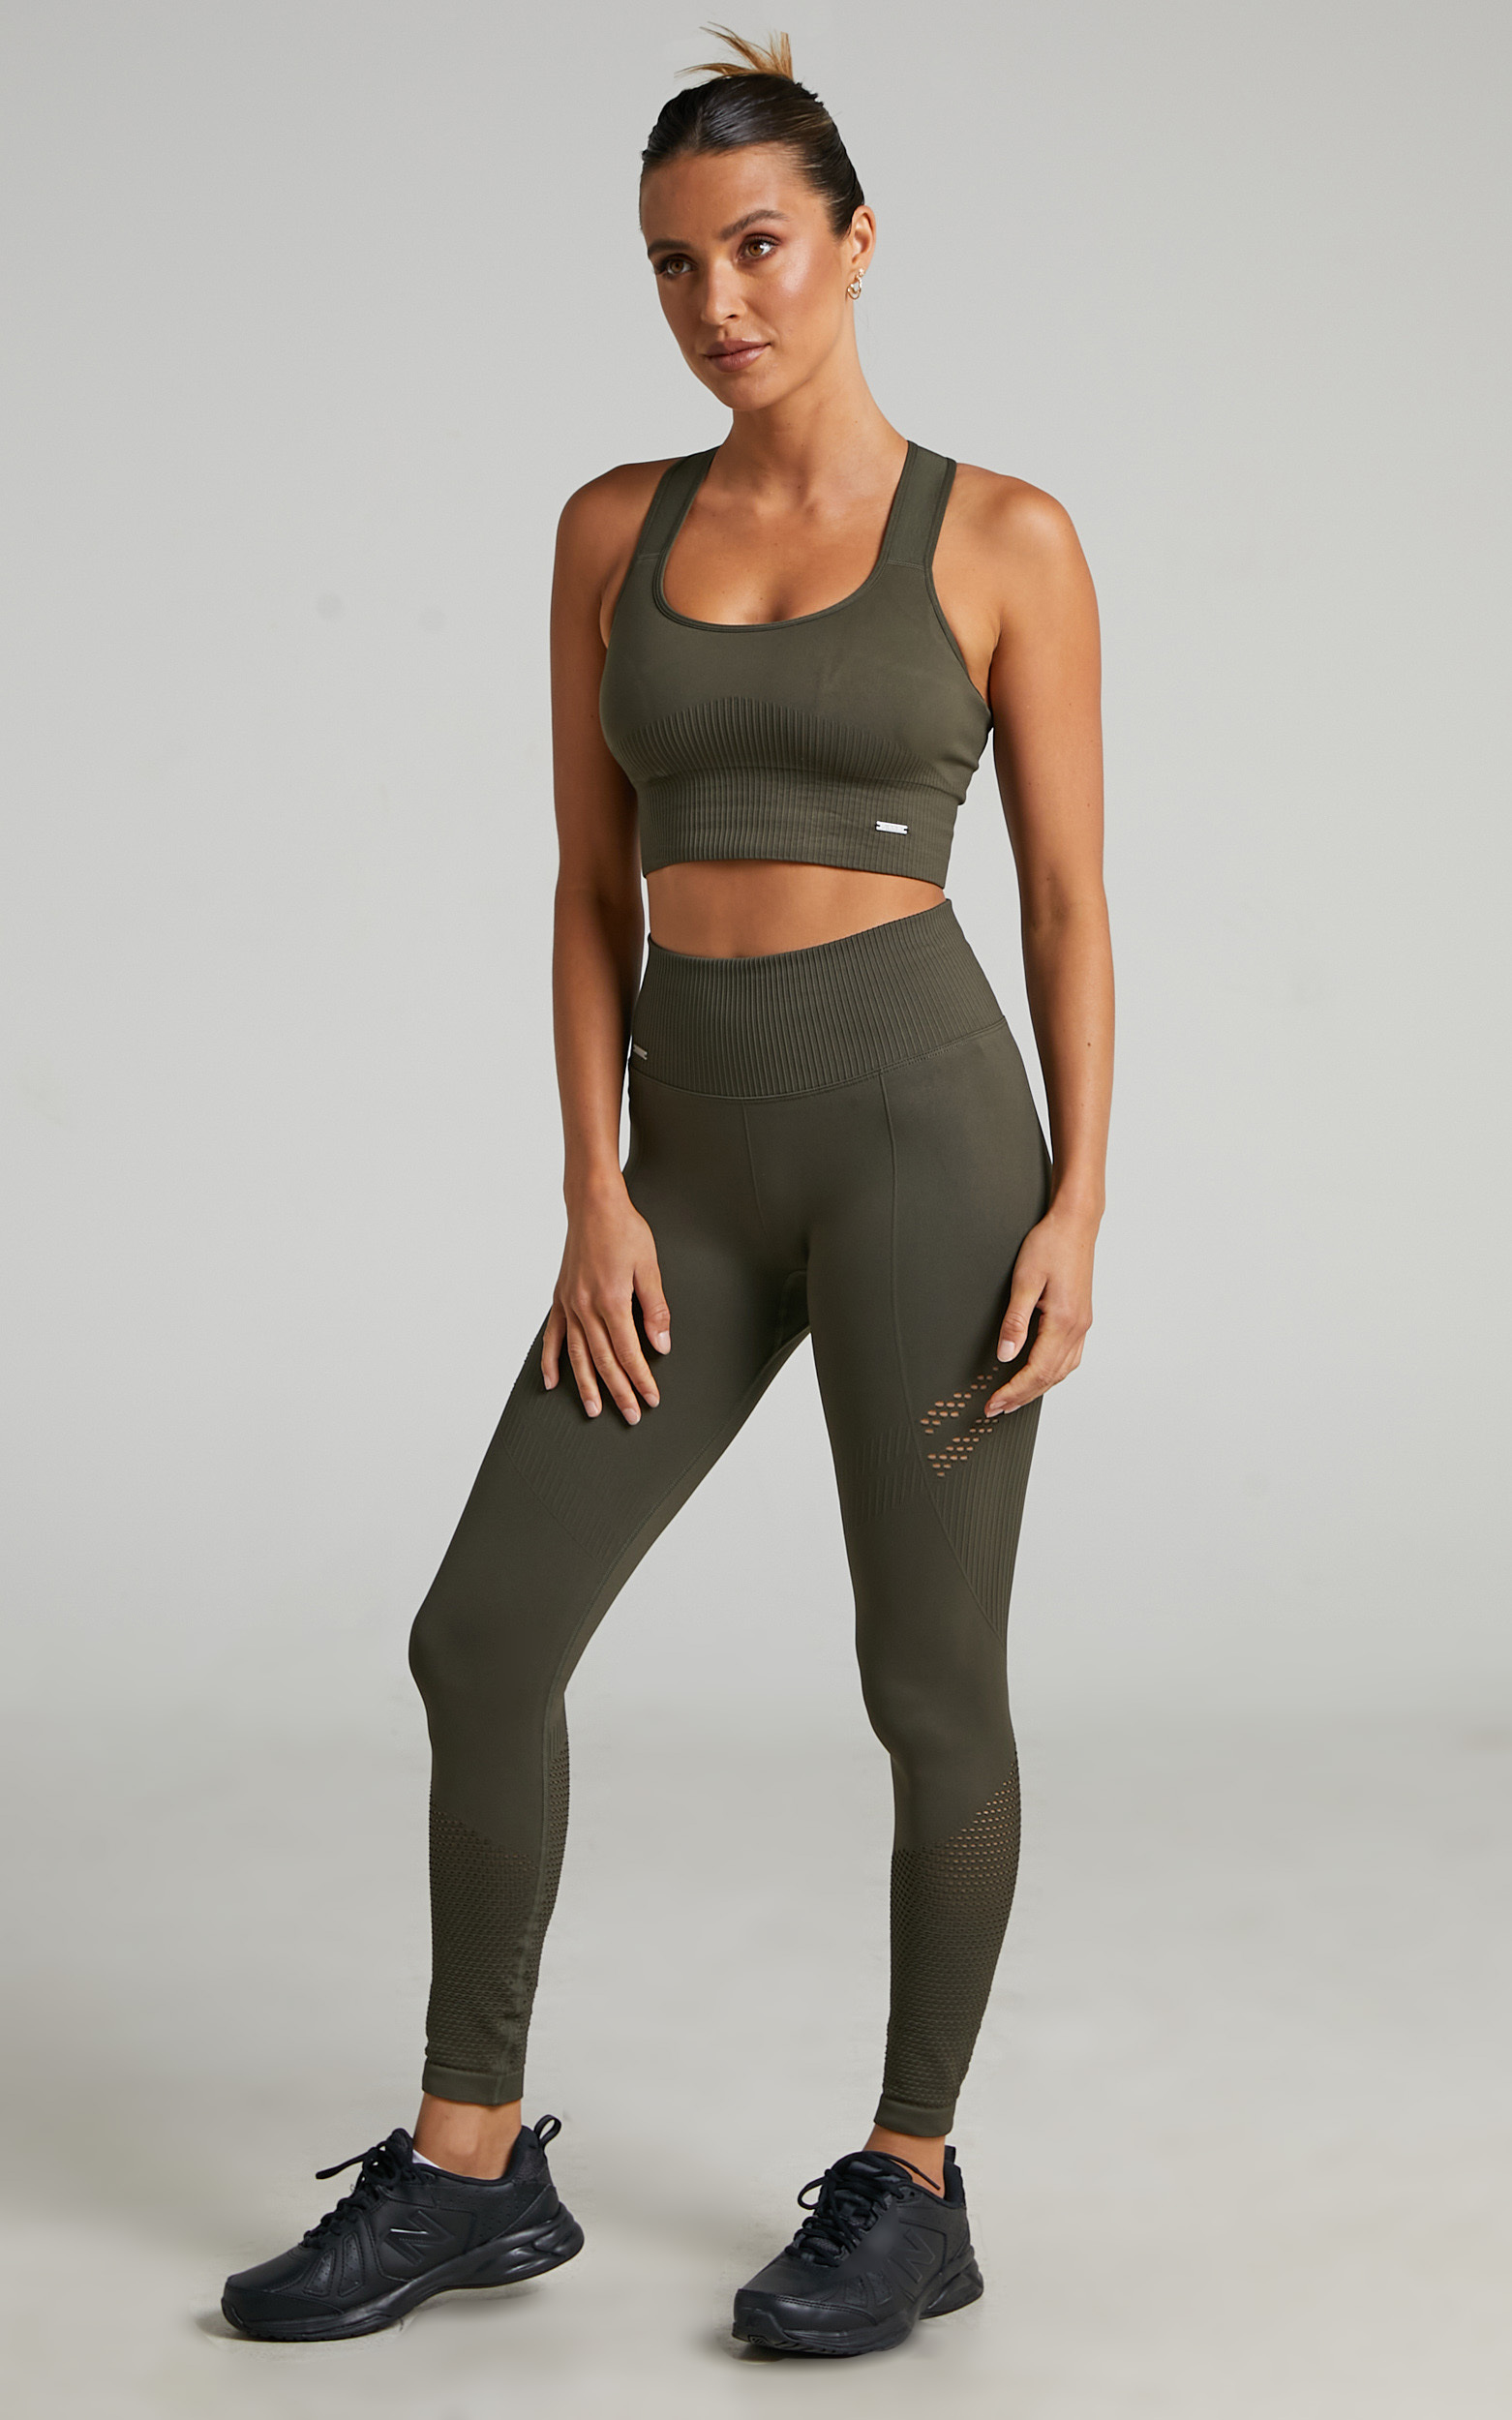 Aim'n - STATEMENT SEAMLESS TIGHTS in Khaki - XS, GRN1, hi-res image number null